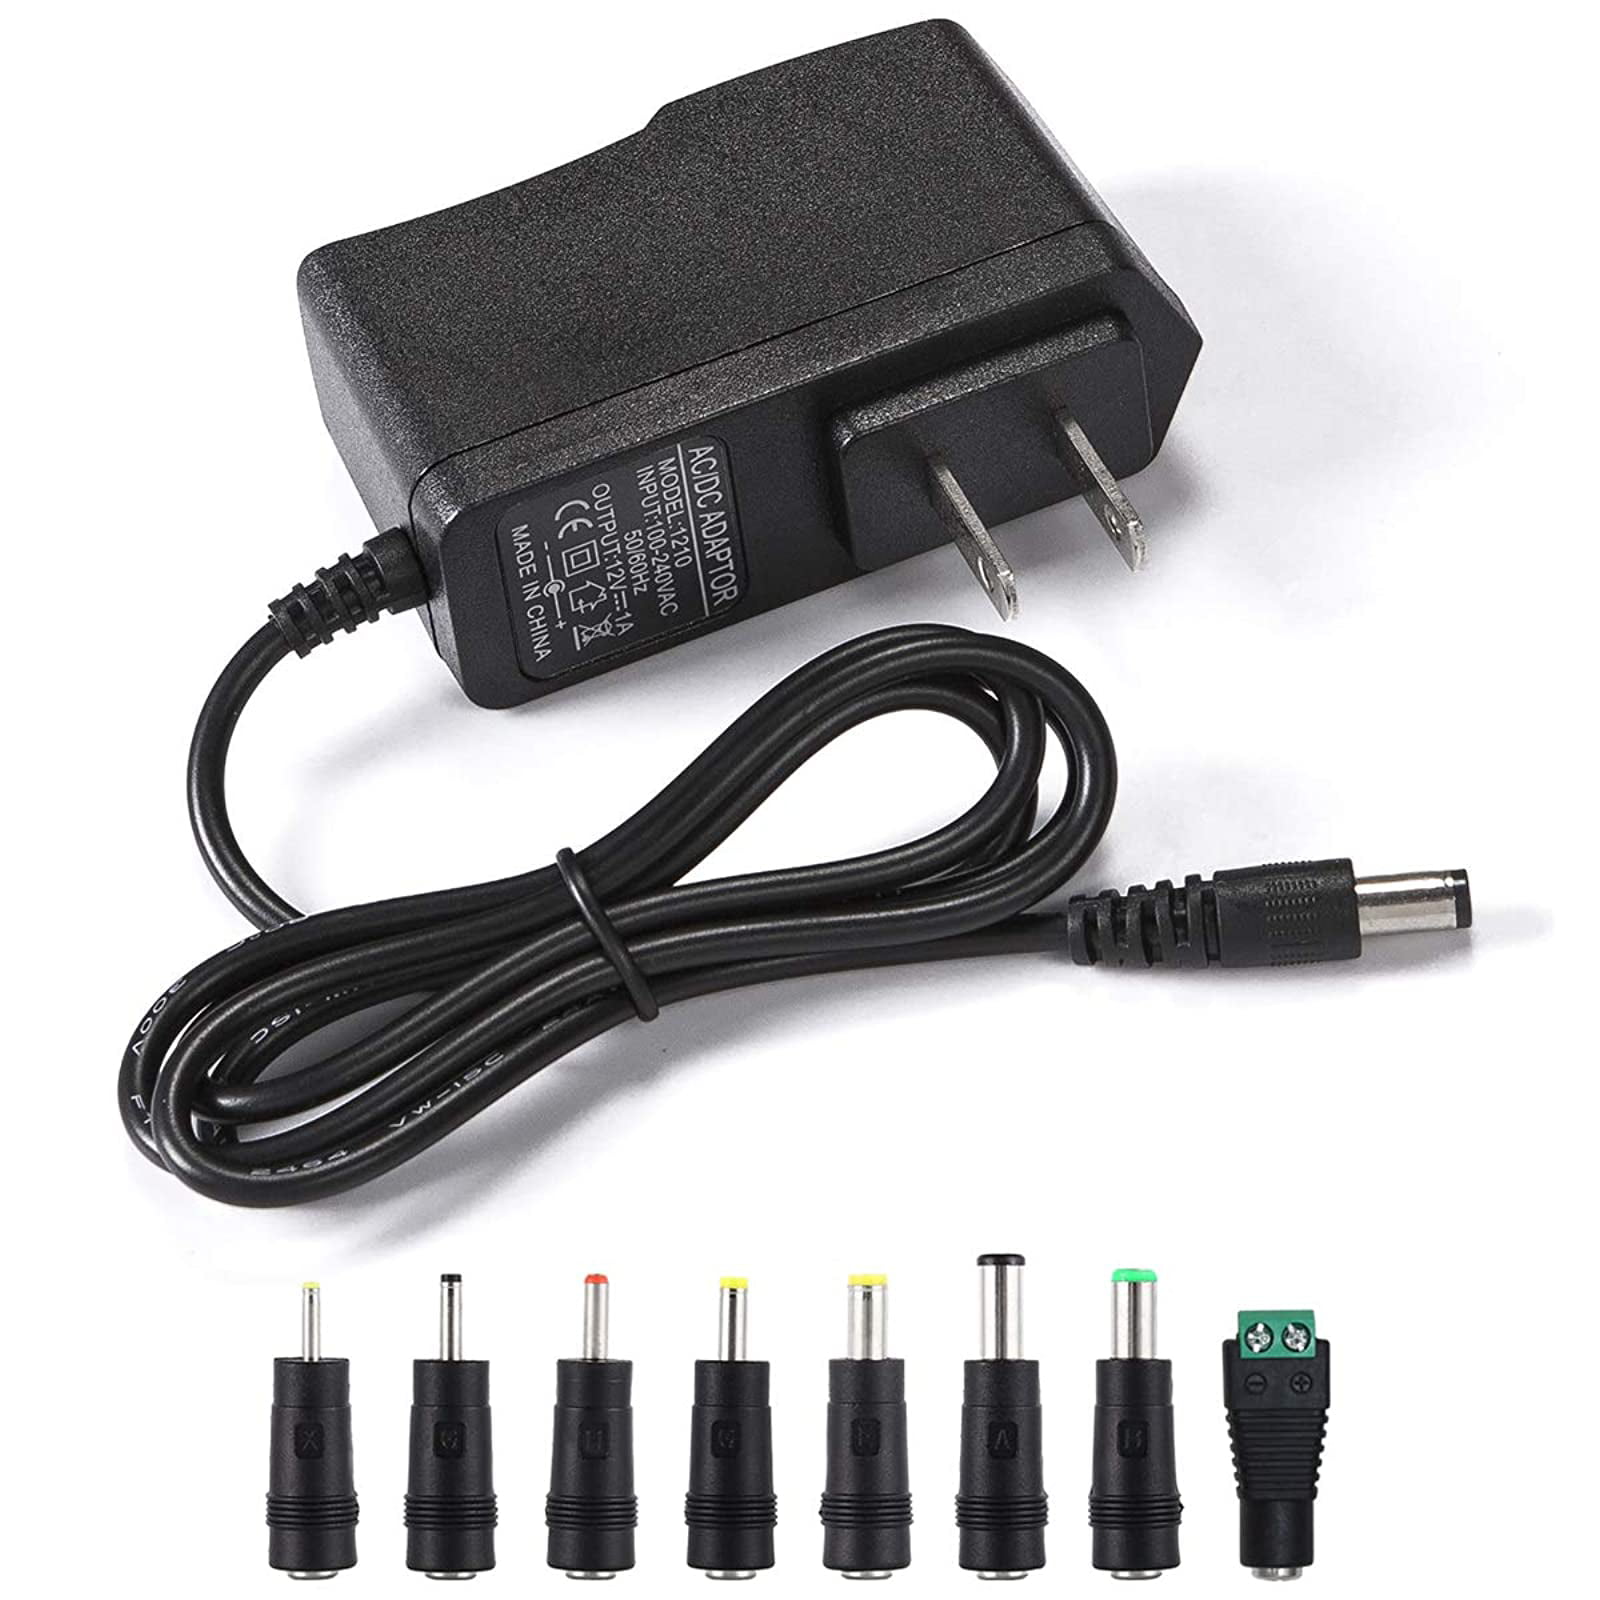 12V 1A POWER SUPPLY ADAPTER CHARGER FOR LED STRIP LIGHT CCTV CAMERA 